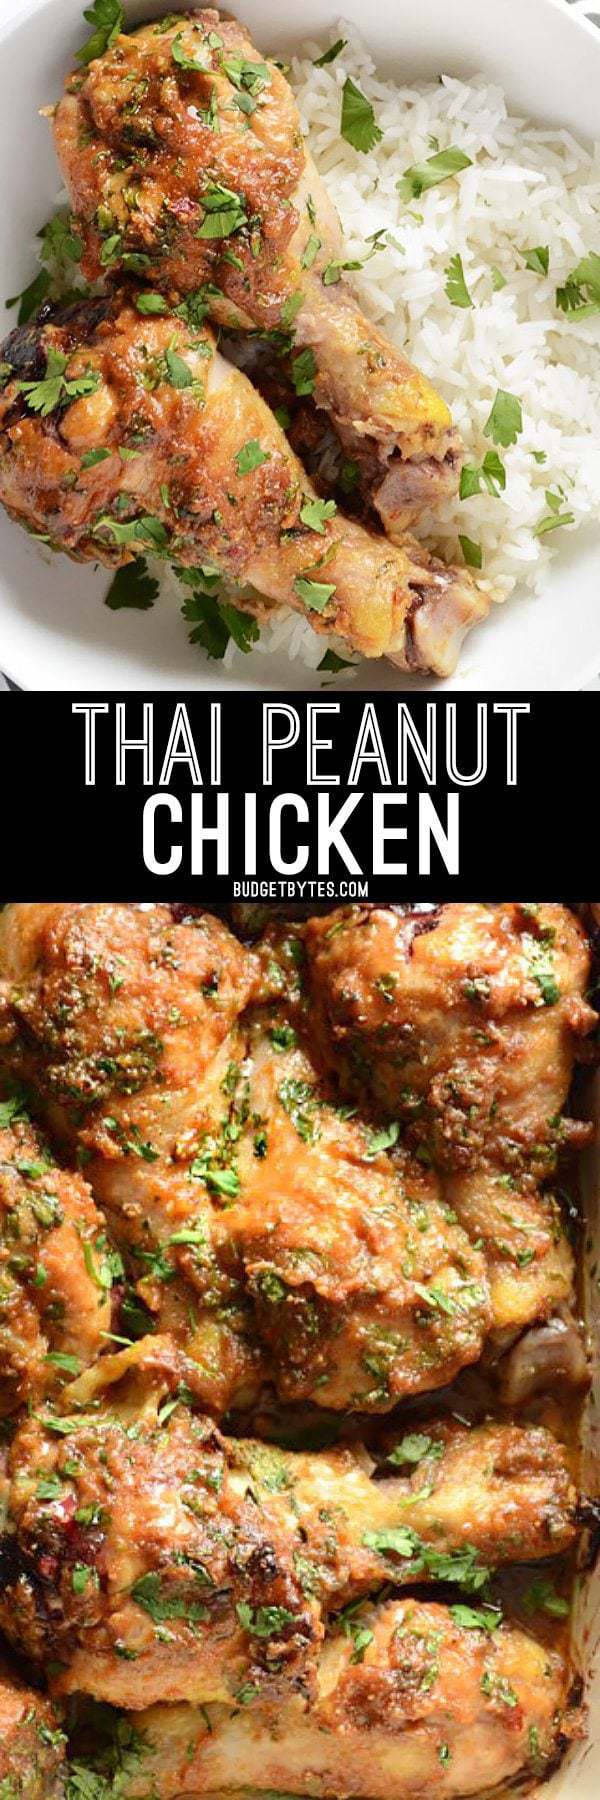 Inexpensive chicken drumsticks are transformed into an exotic and flavorful Thai Peanut Chicken thanks to a simple Thai Peanut Sauce. BudgetBytes.com